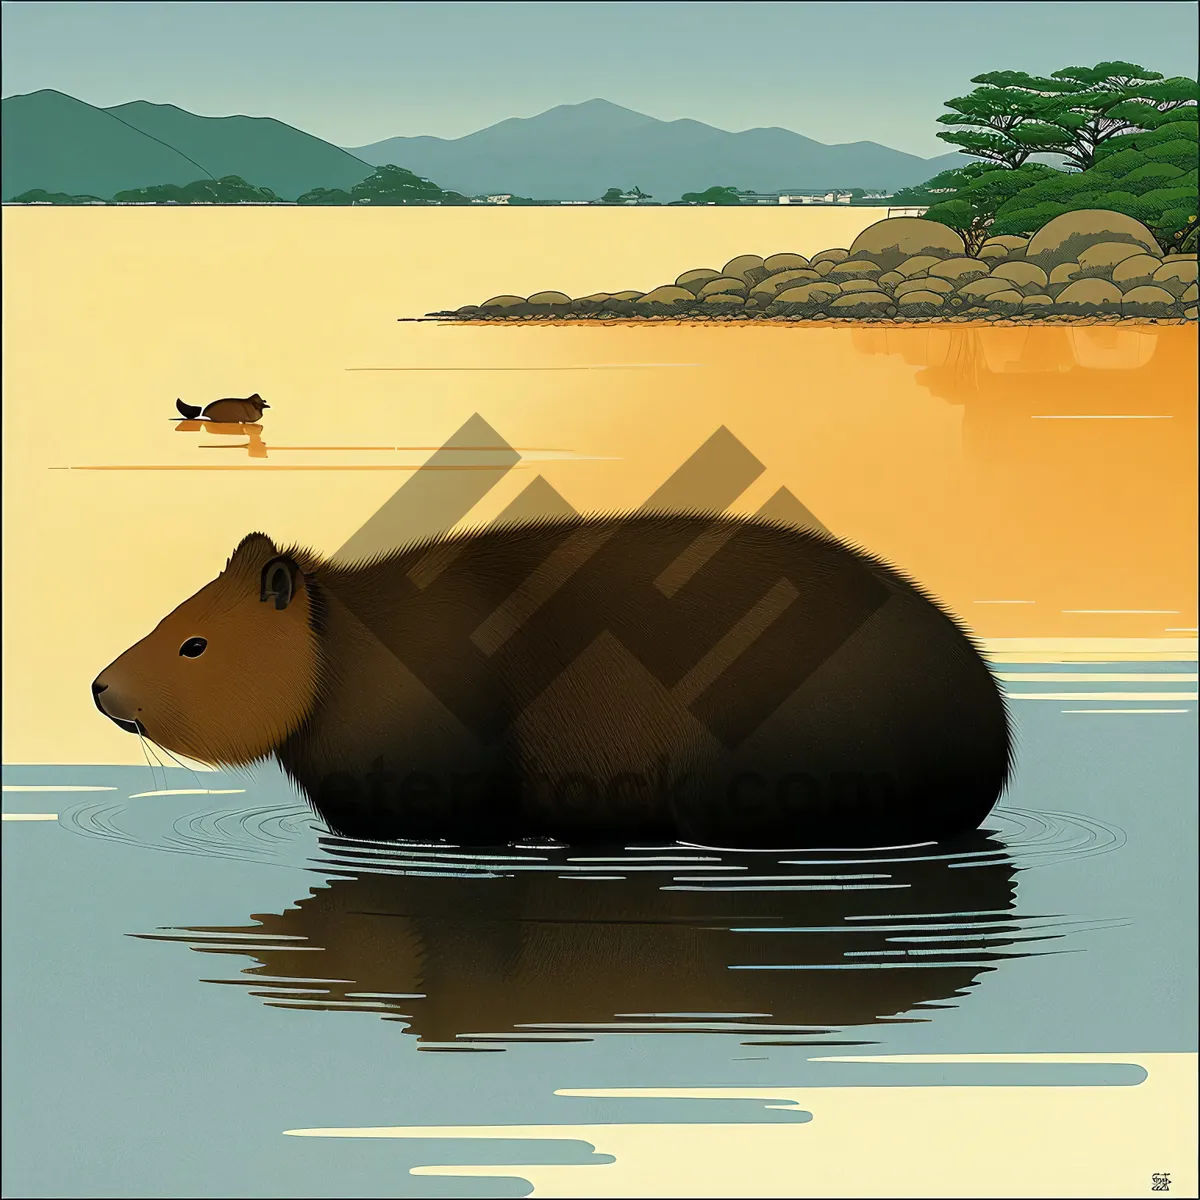 Picture of Majestic Hippo Basking in Coastal Waters"

(Note: It is important to note that image alt text is typically used for accessibility purposes, rather than SEO. However, I have provided a descriptive image name based on the given tags.)